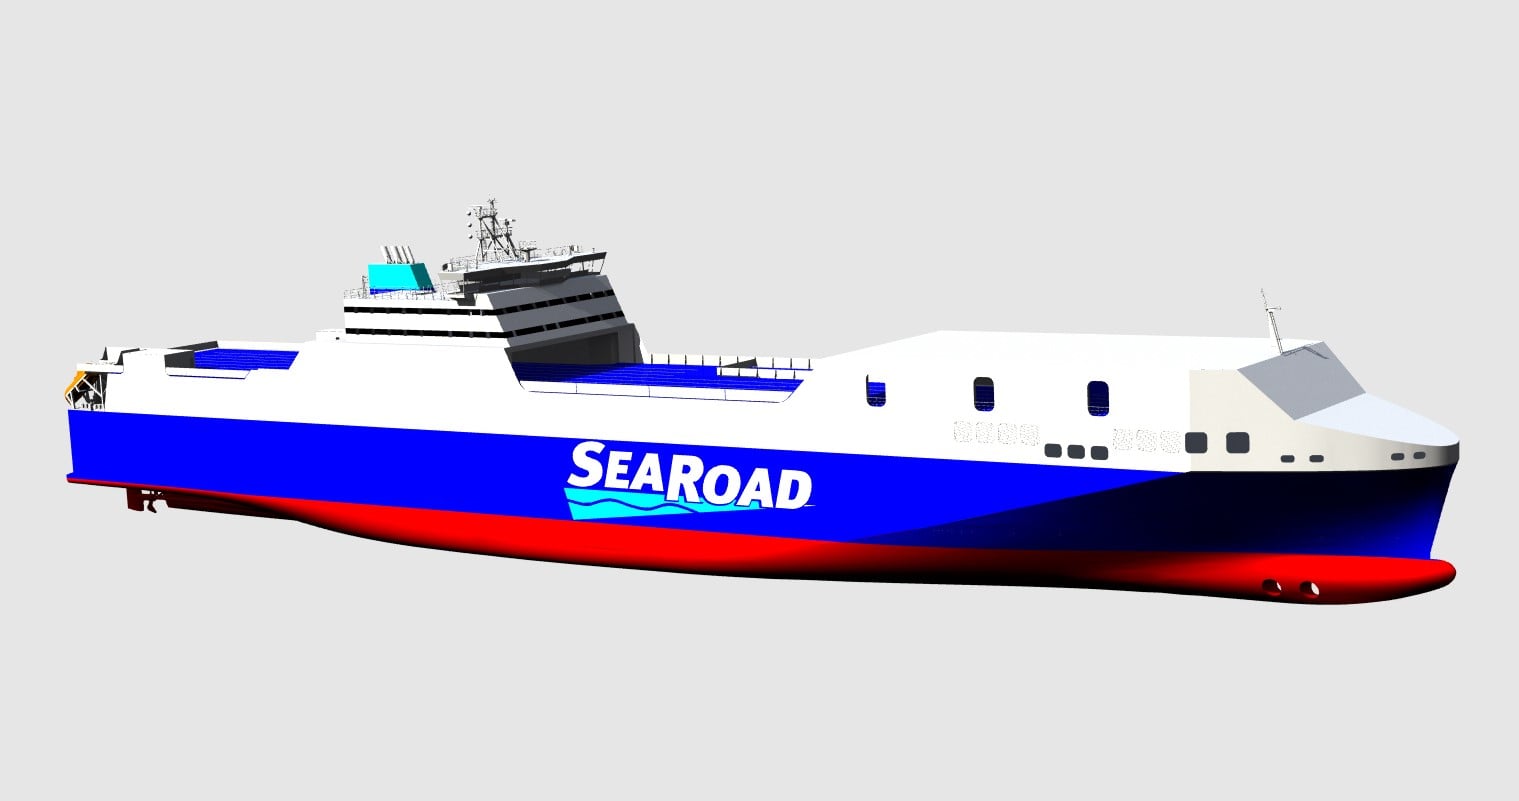 Australia's SeaRoad orders one LNG ferry at Germany's FSG